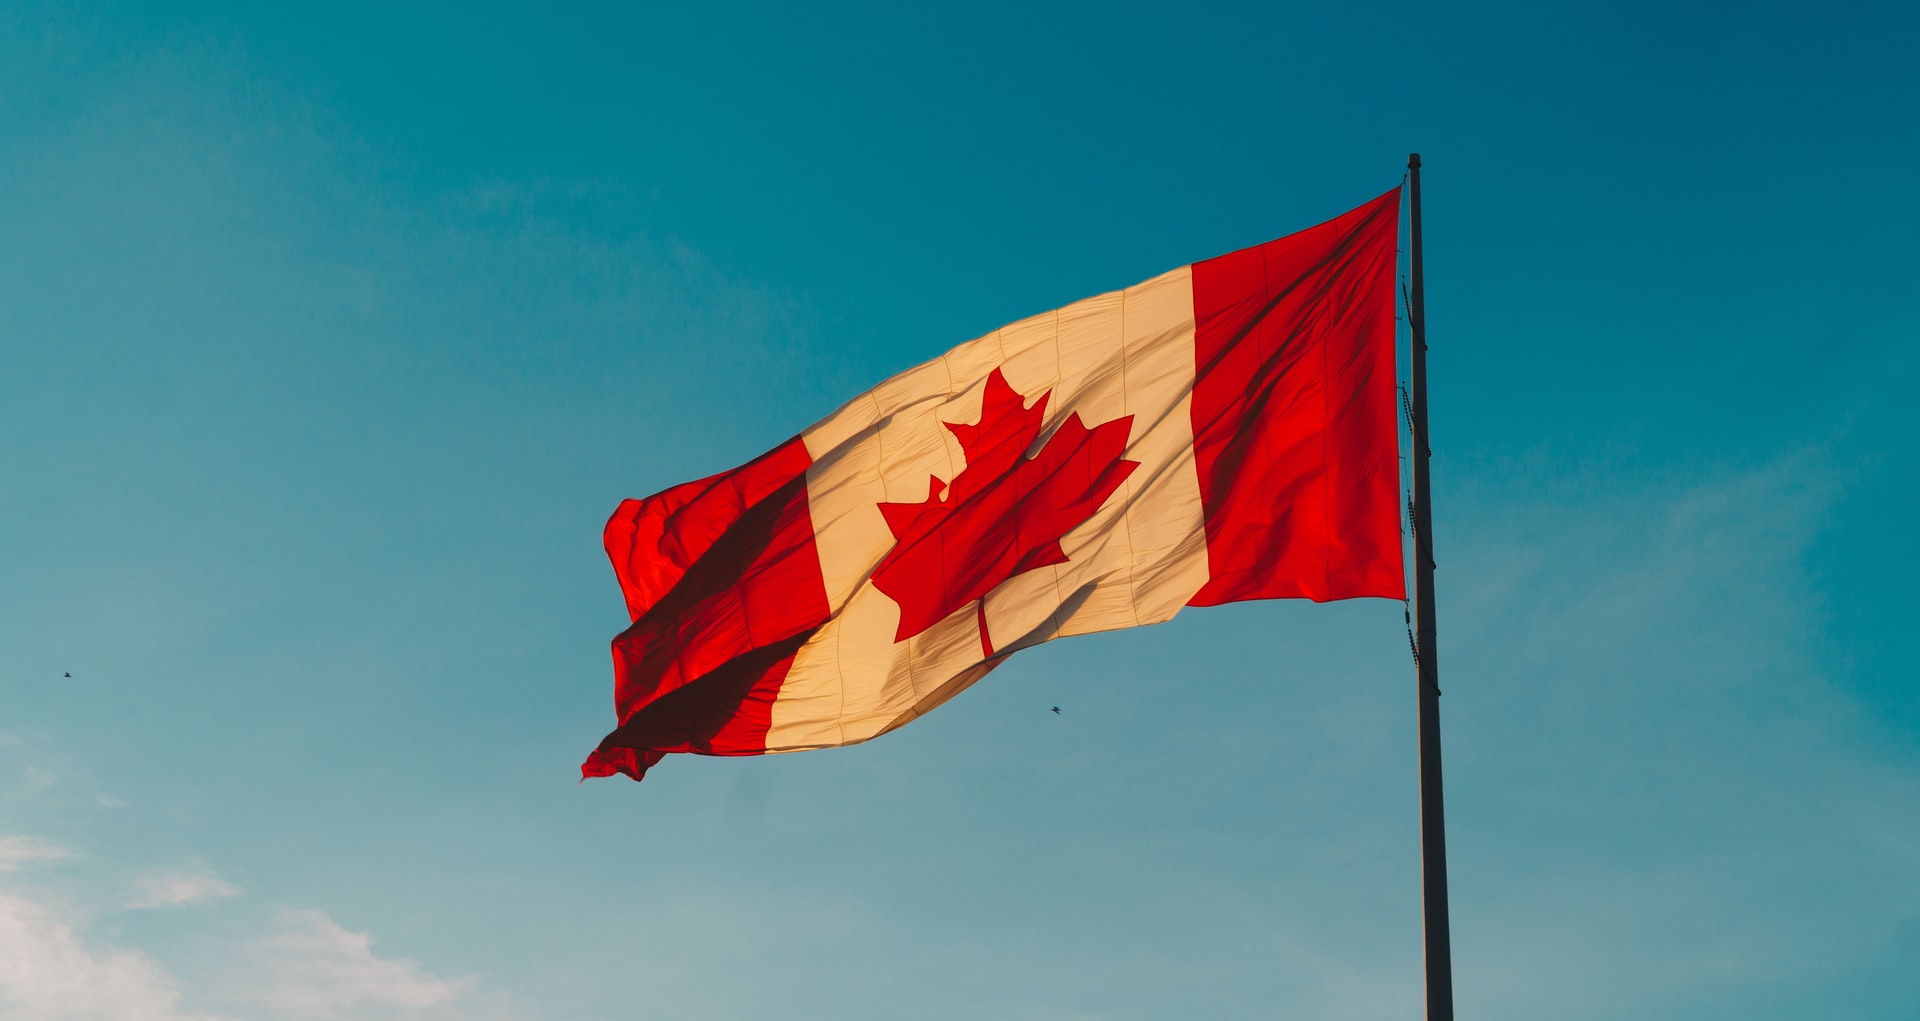 Canadian flag representing a person being denied entry to Canada for misrepresenting material facts in their application